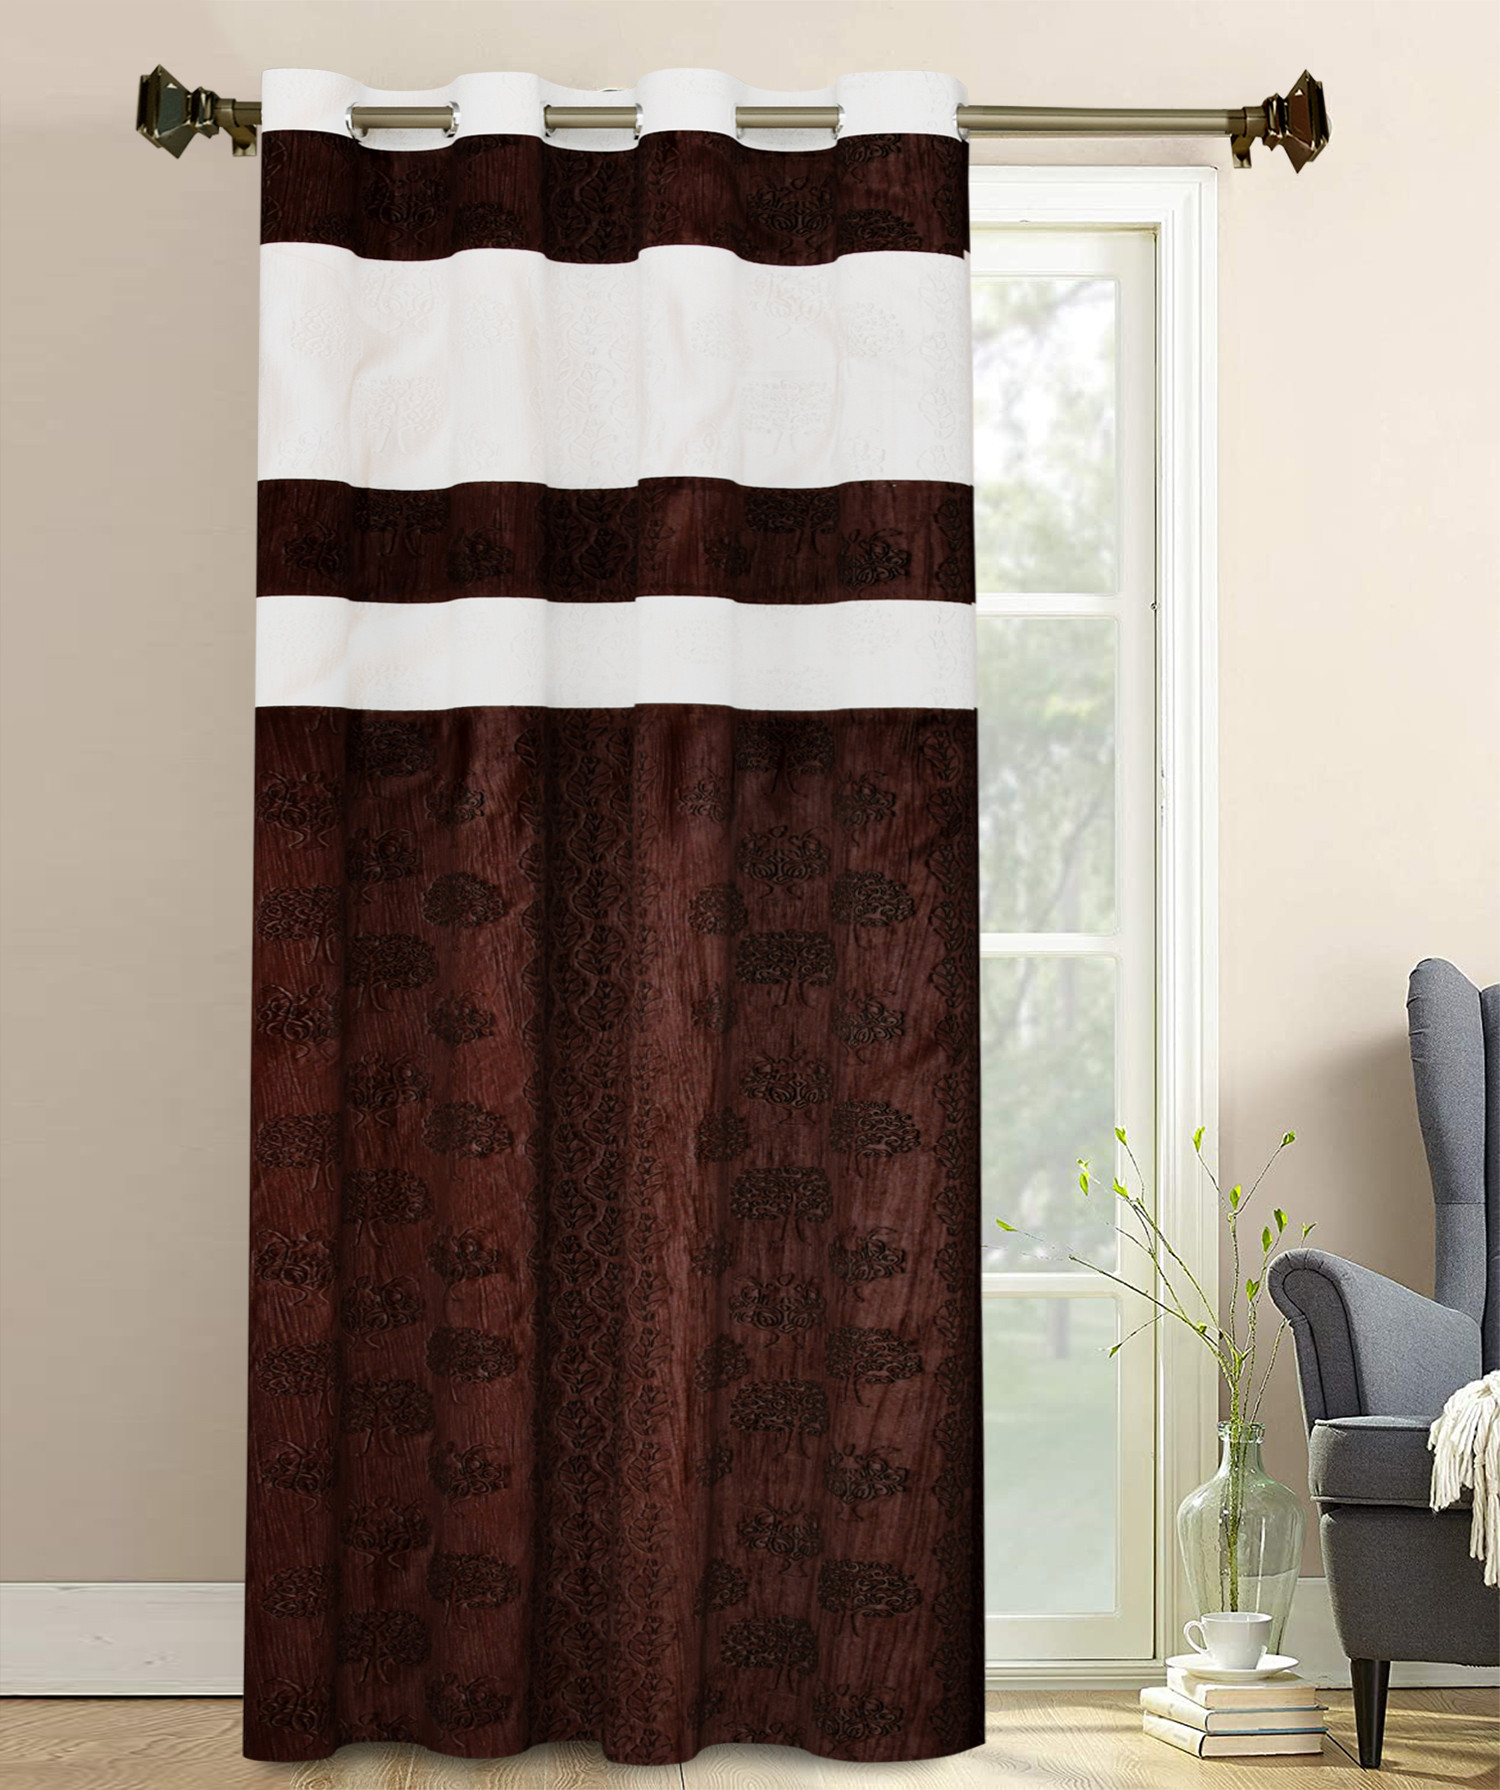 Kuber Industries Forest Printed 7 Feet Door Curtain For Living Room, Bed Room, Kids Room With 8 Eyelet (Brown & Cream)-HS43KUBMART25605